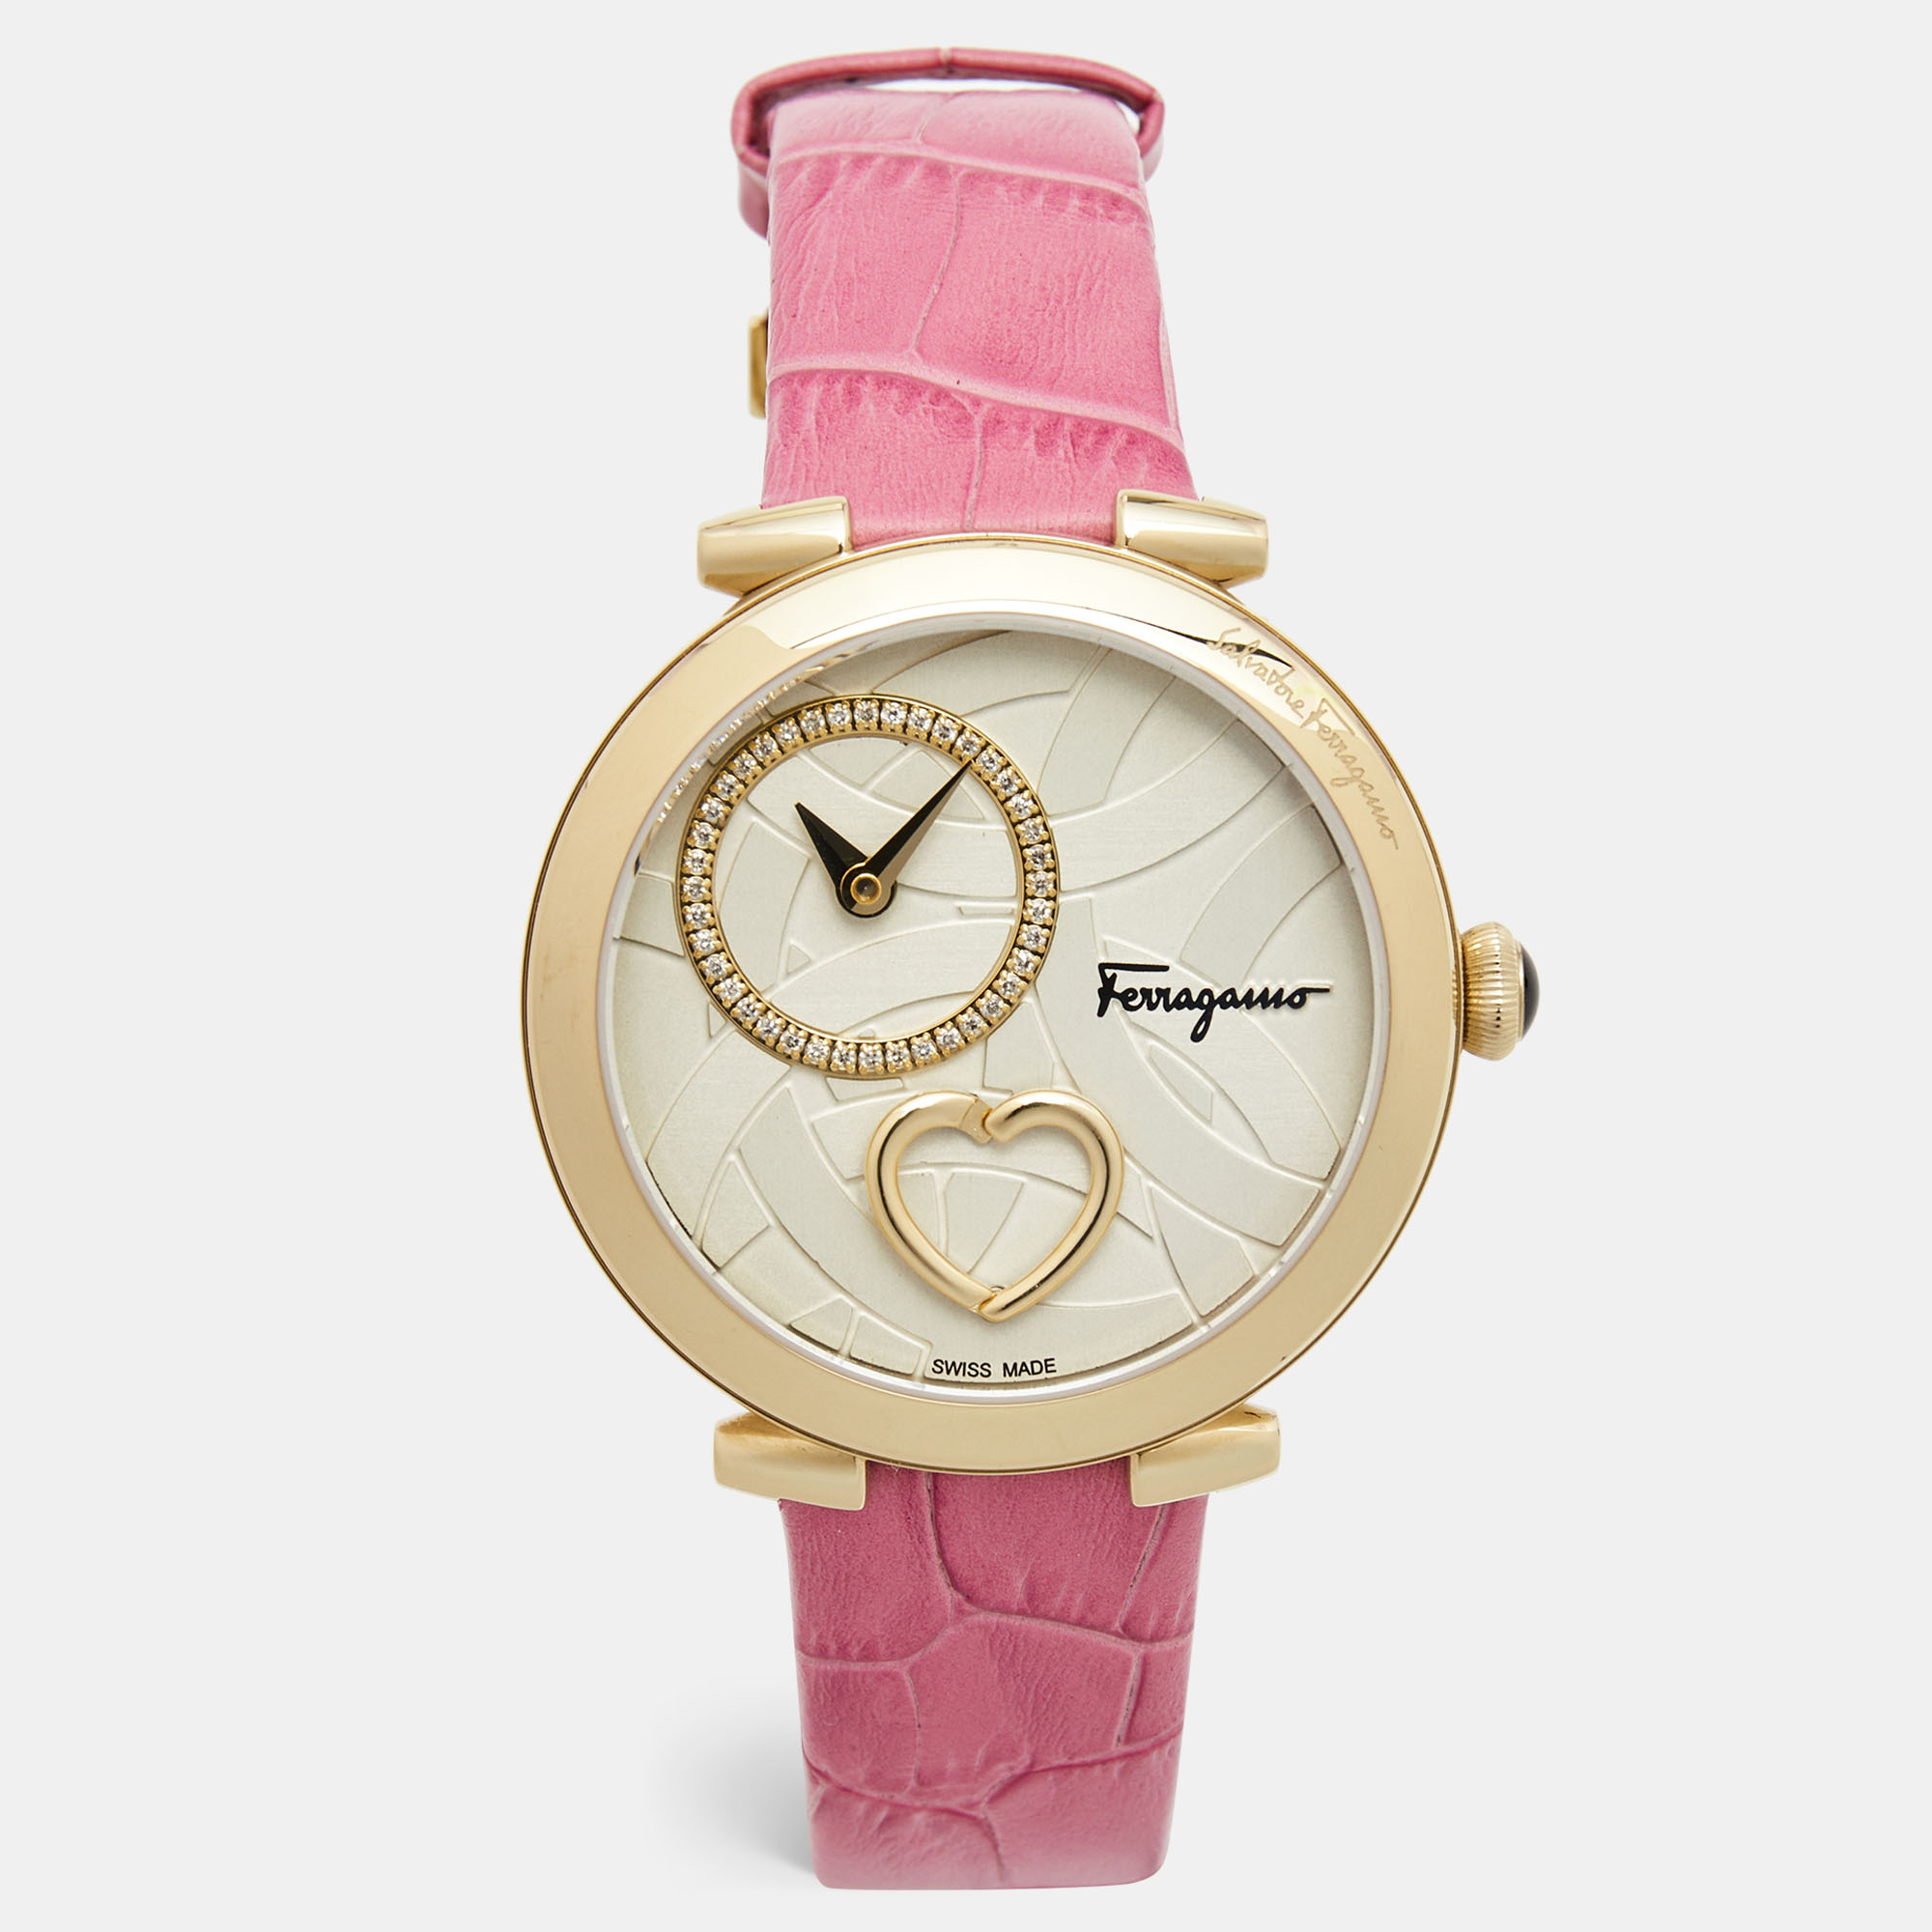 Salvatore Ferragamo Cuore Beating Heart Gold Tone Stainless Steel Leather FE2040016 Women's Wristwatch 39 MM